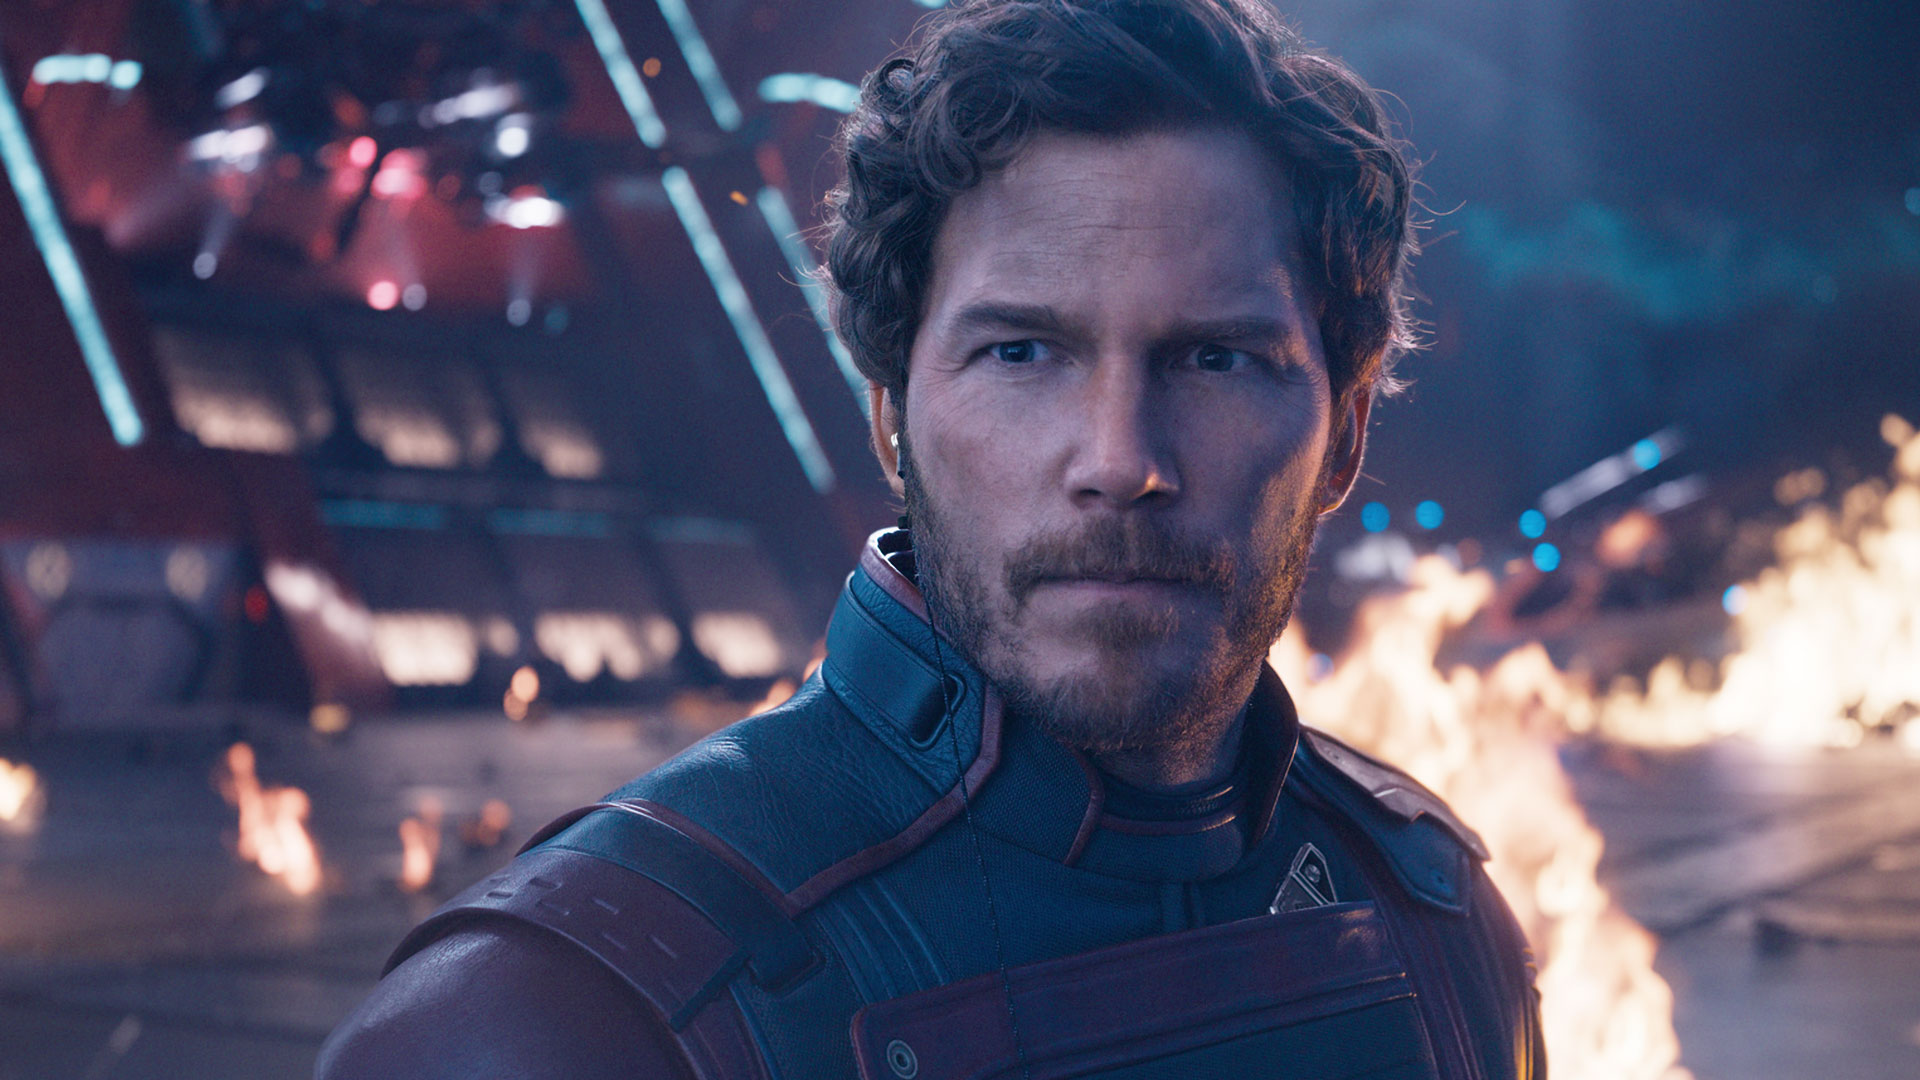 Chris Pratt as Star-Lord in Guardians of the Galaxy Vol 3 - what does it owe to Doctor Who?